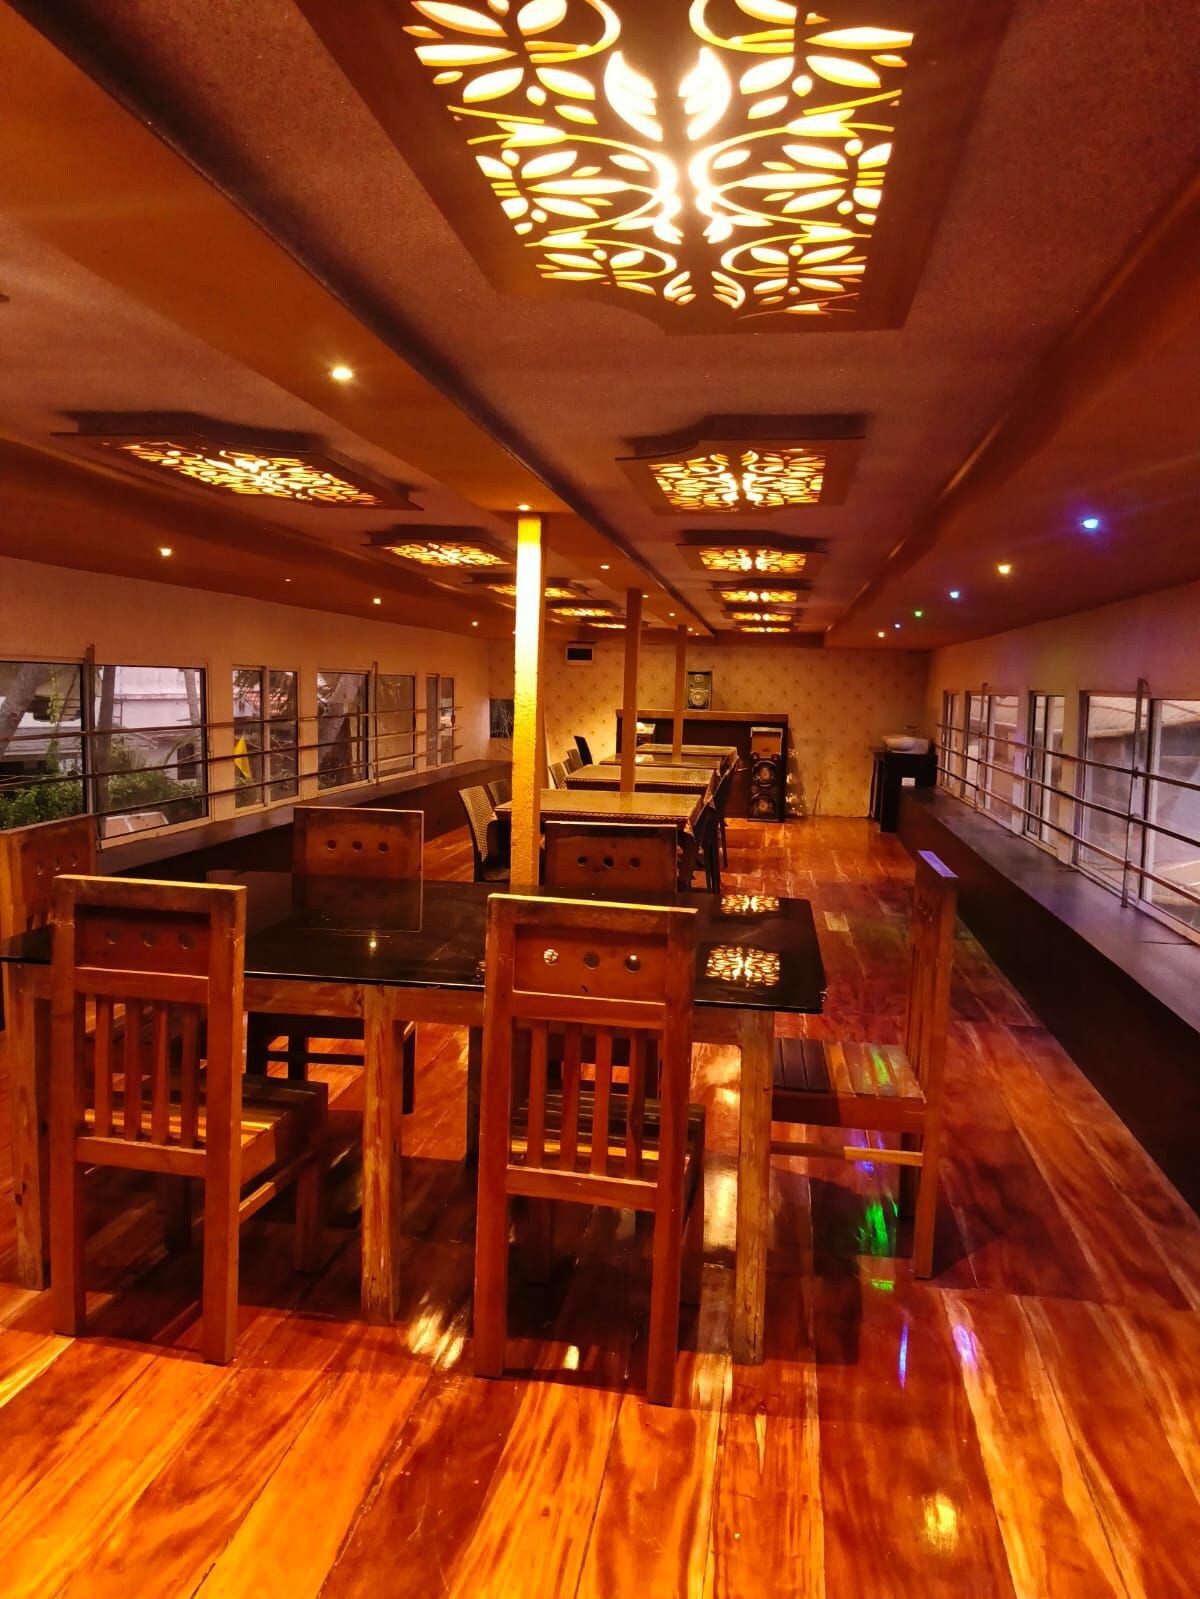 House Boat Alleppey